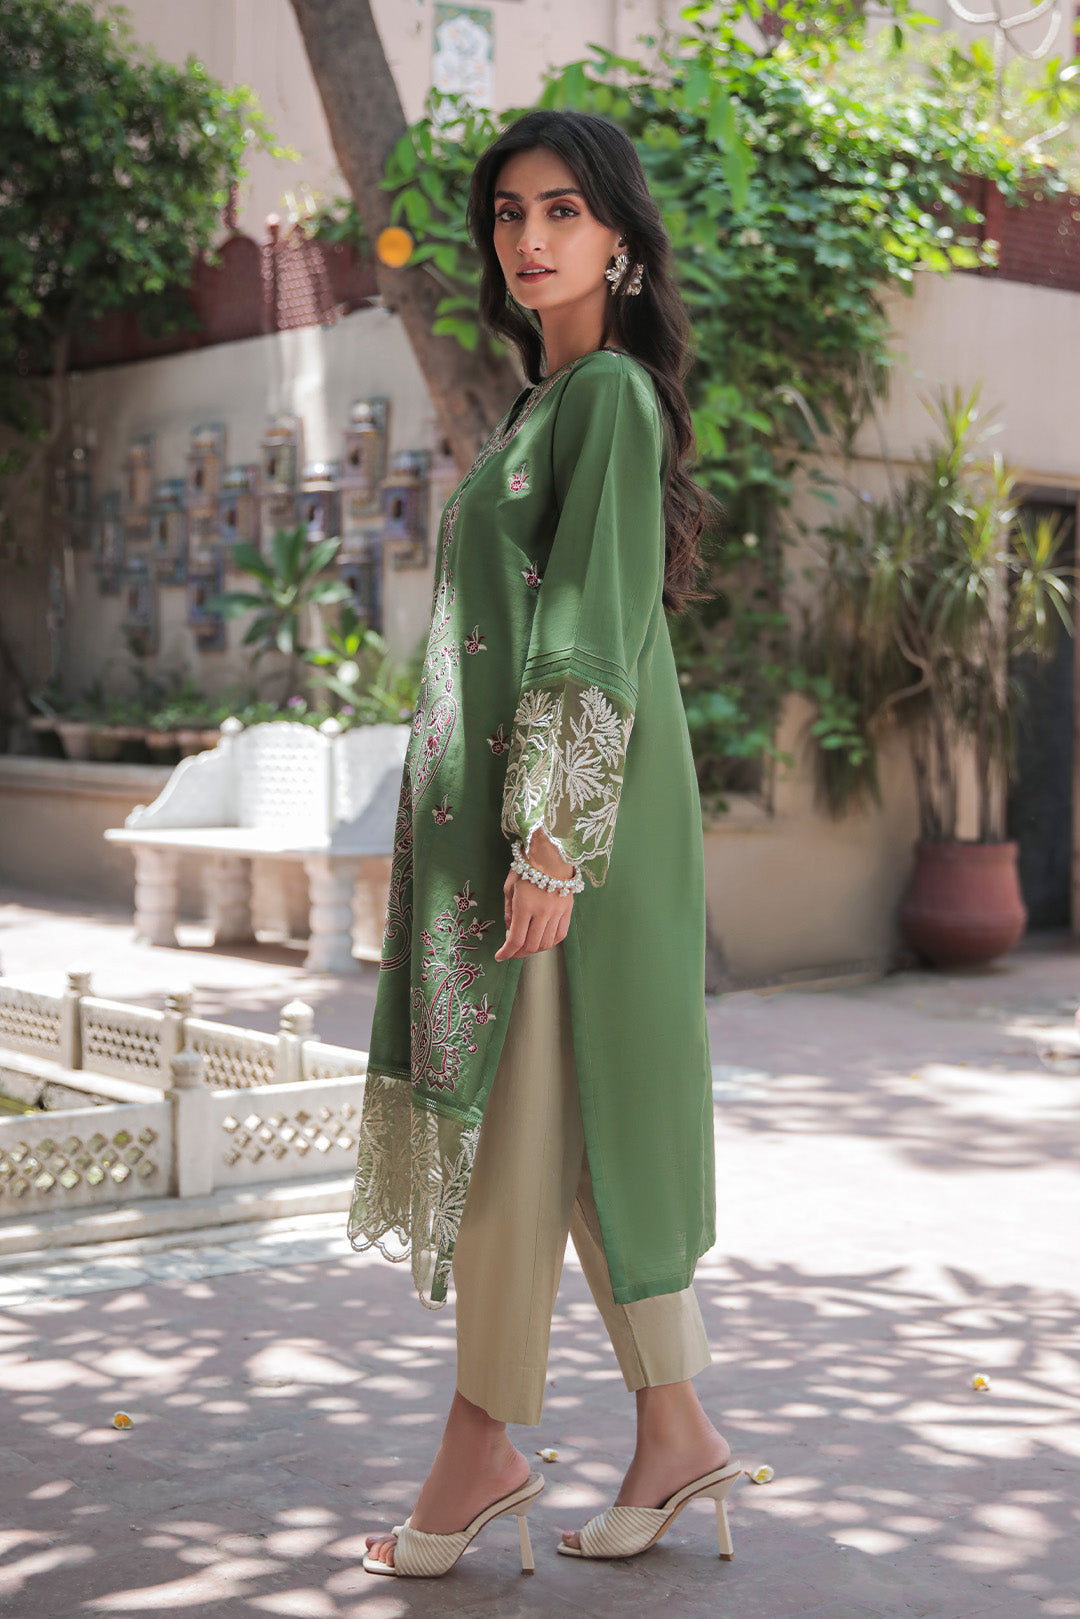 1 Piece - Dyed Embroidered Textured Lawn Shirt P0714